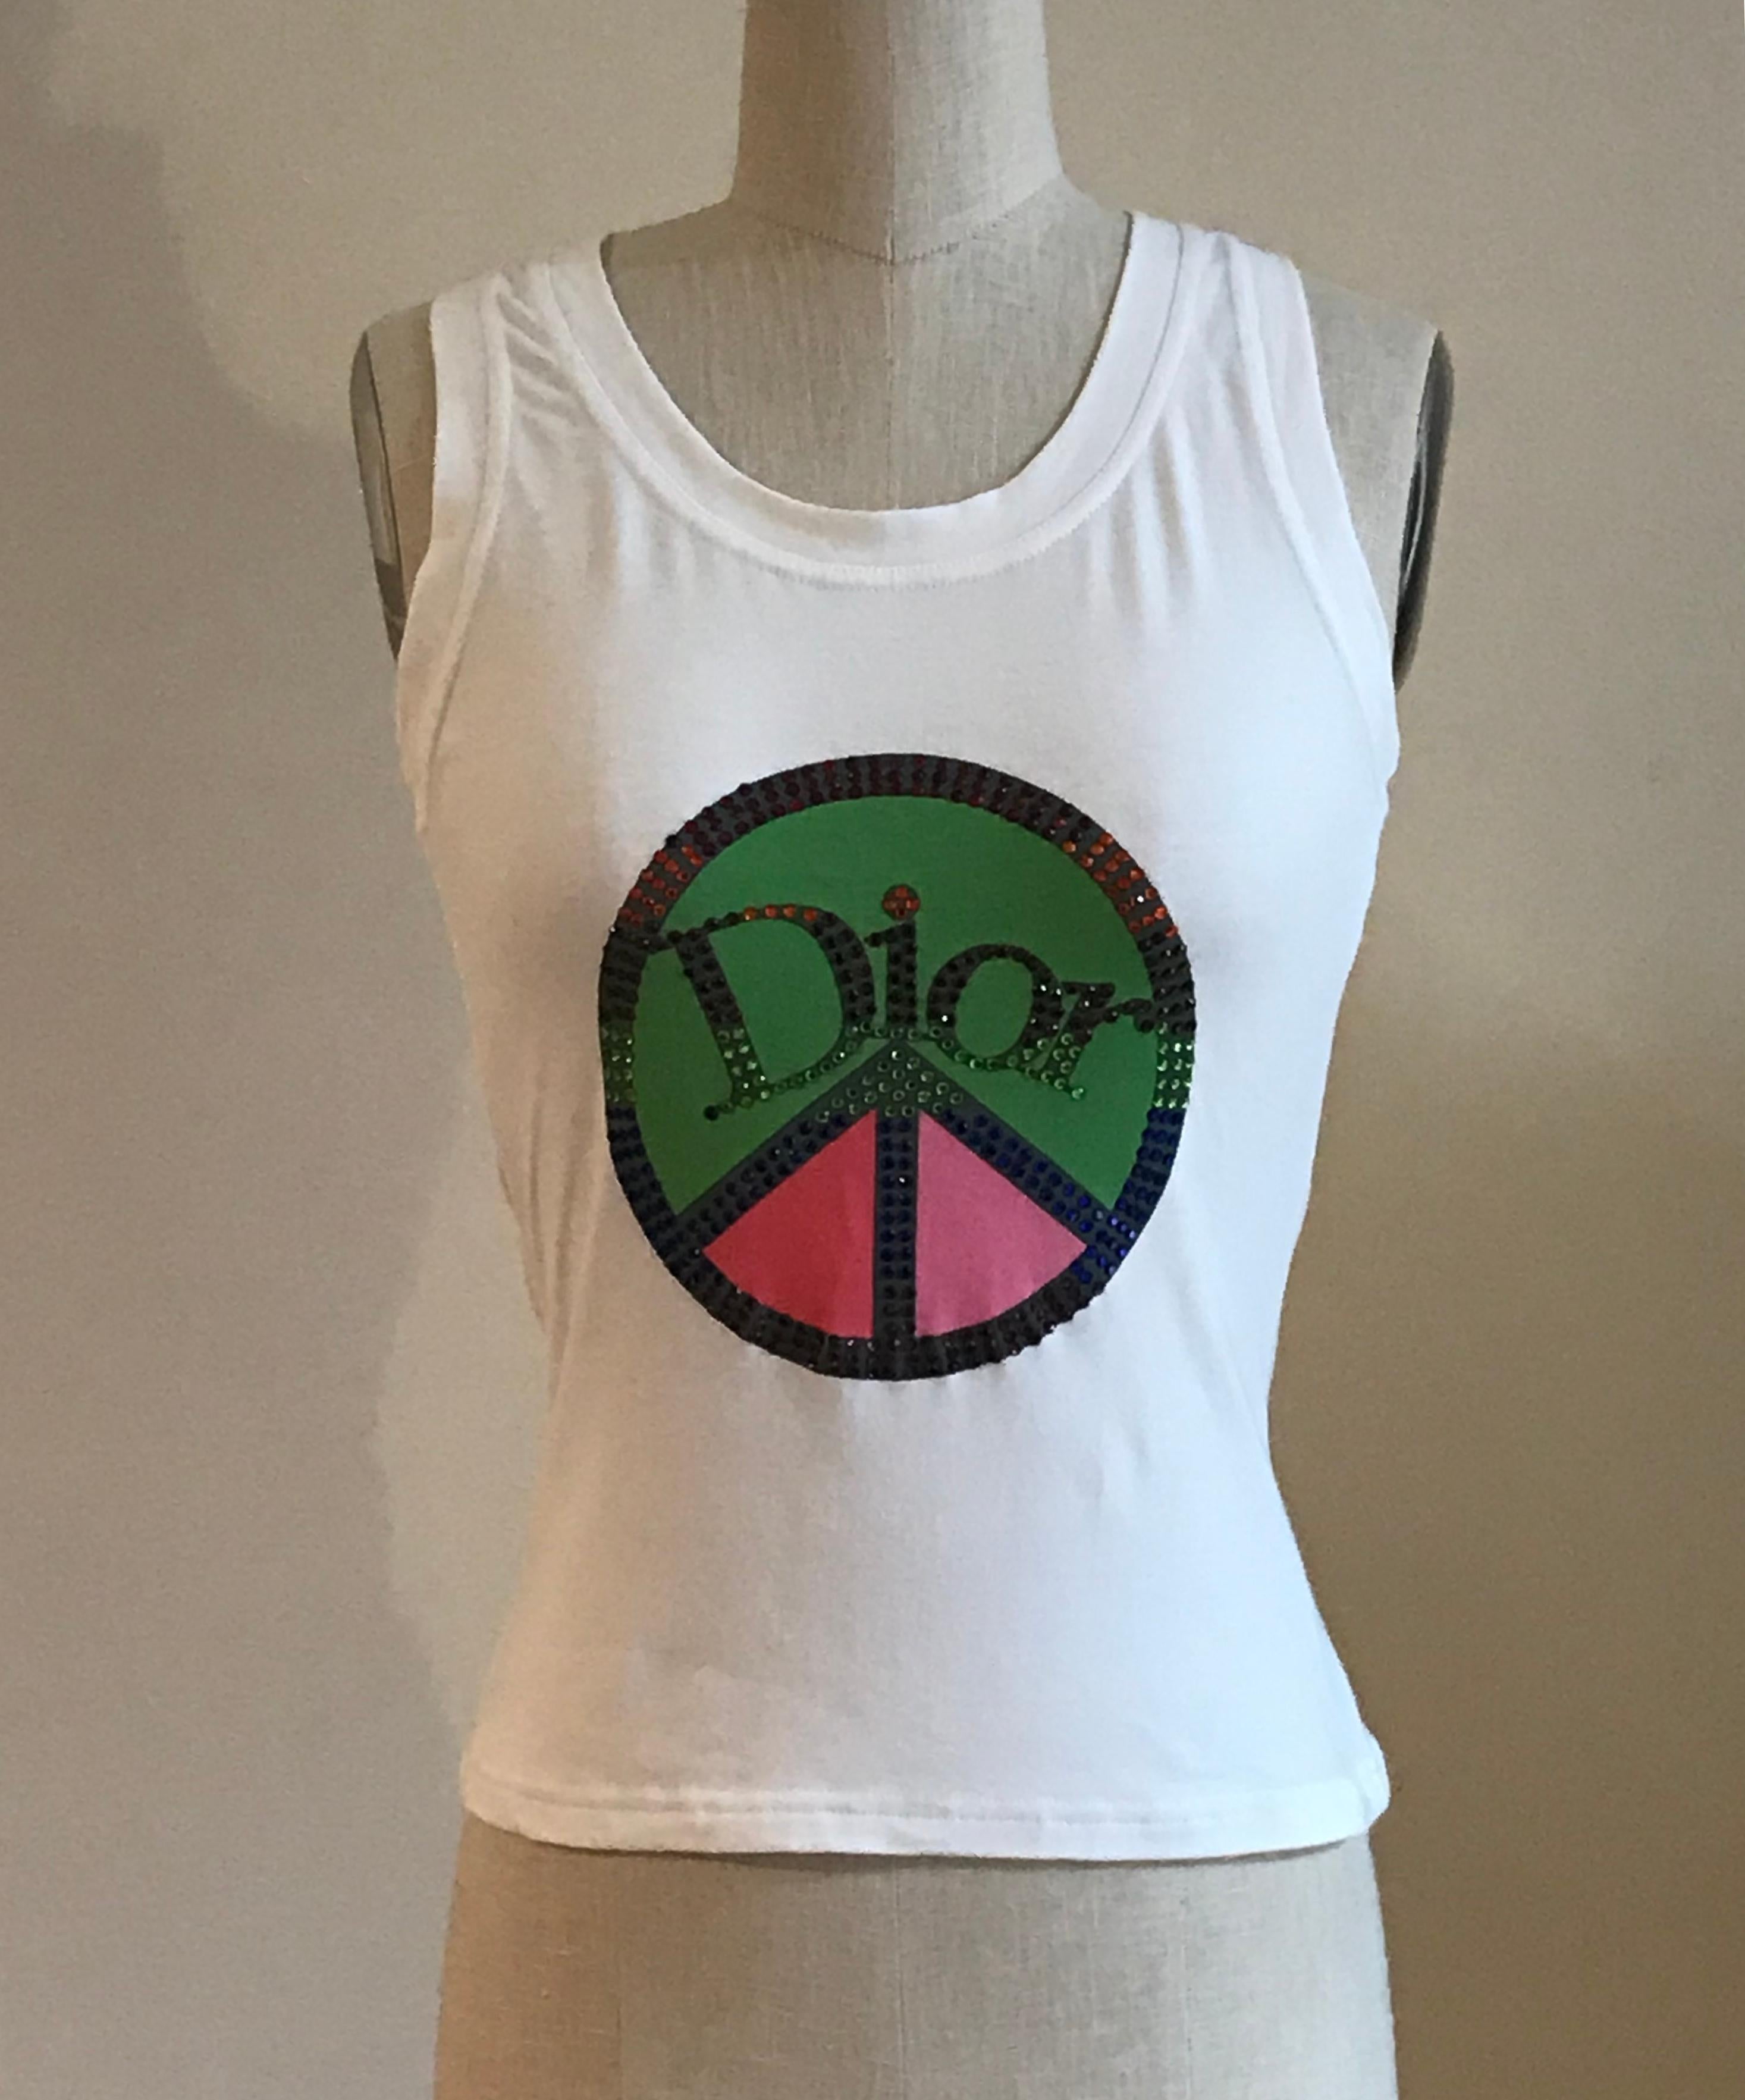 Christian Dior white sleeveless t-shirt style tank top featuring a multicolored crystal embellished peace sign and Dior logo at front and 1947 in crystals at back. 

95% cotton, 5% lycra.

Made in Italy.

Labelled French 40, US 8 but seems to better